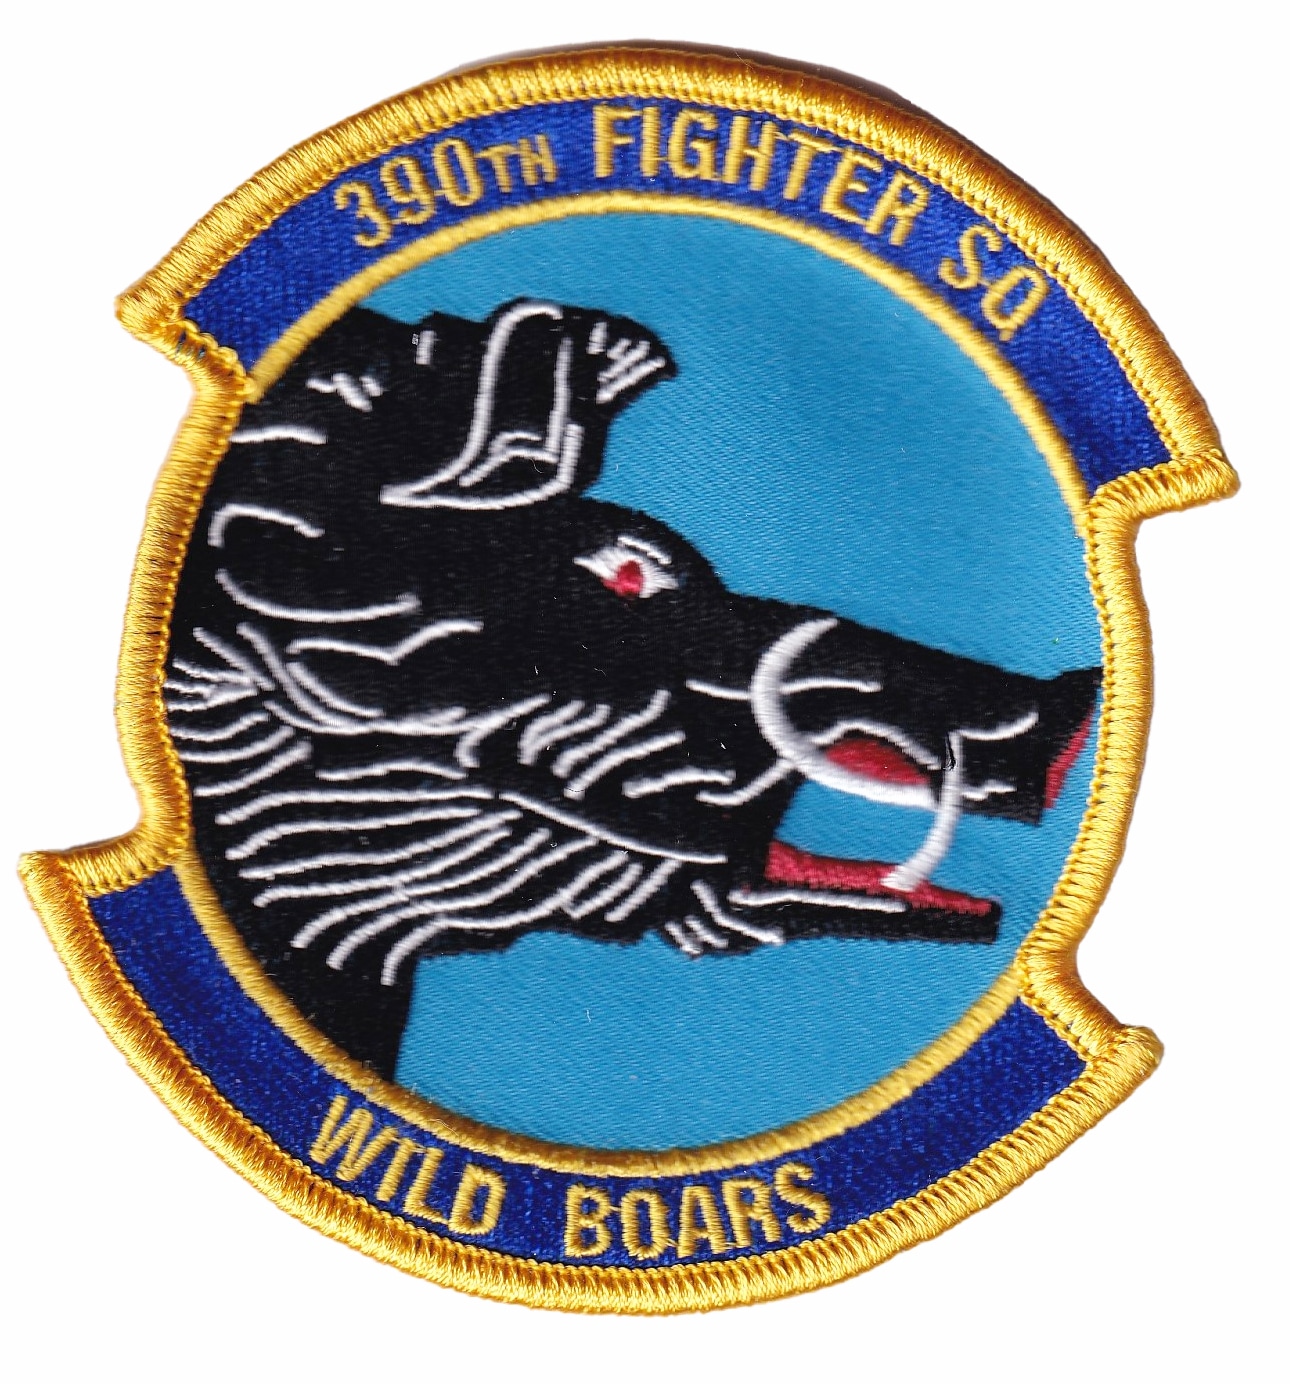 390th Fighter Squadron Patch - Plastic Backing, 4"